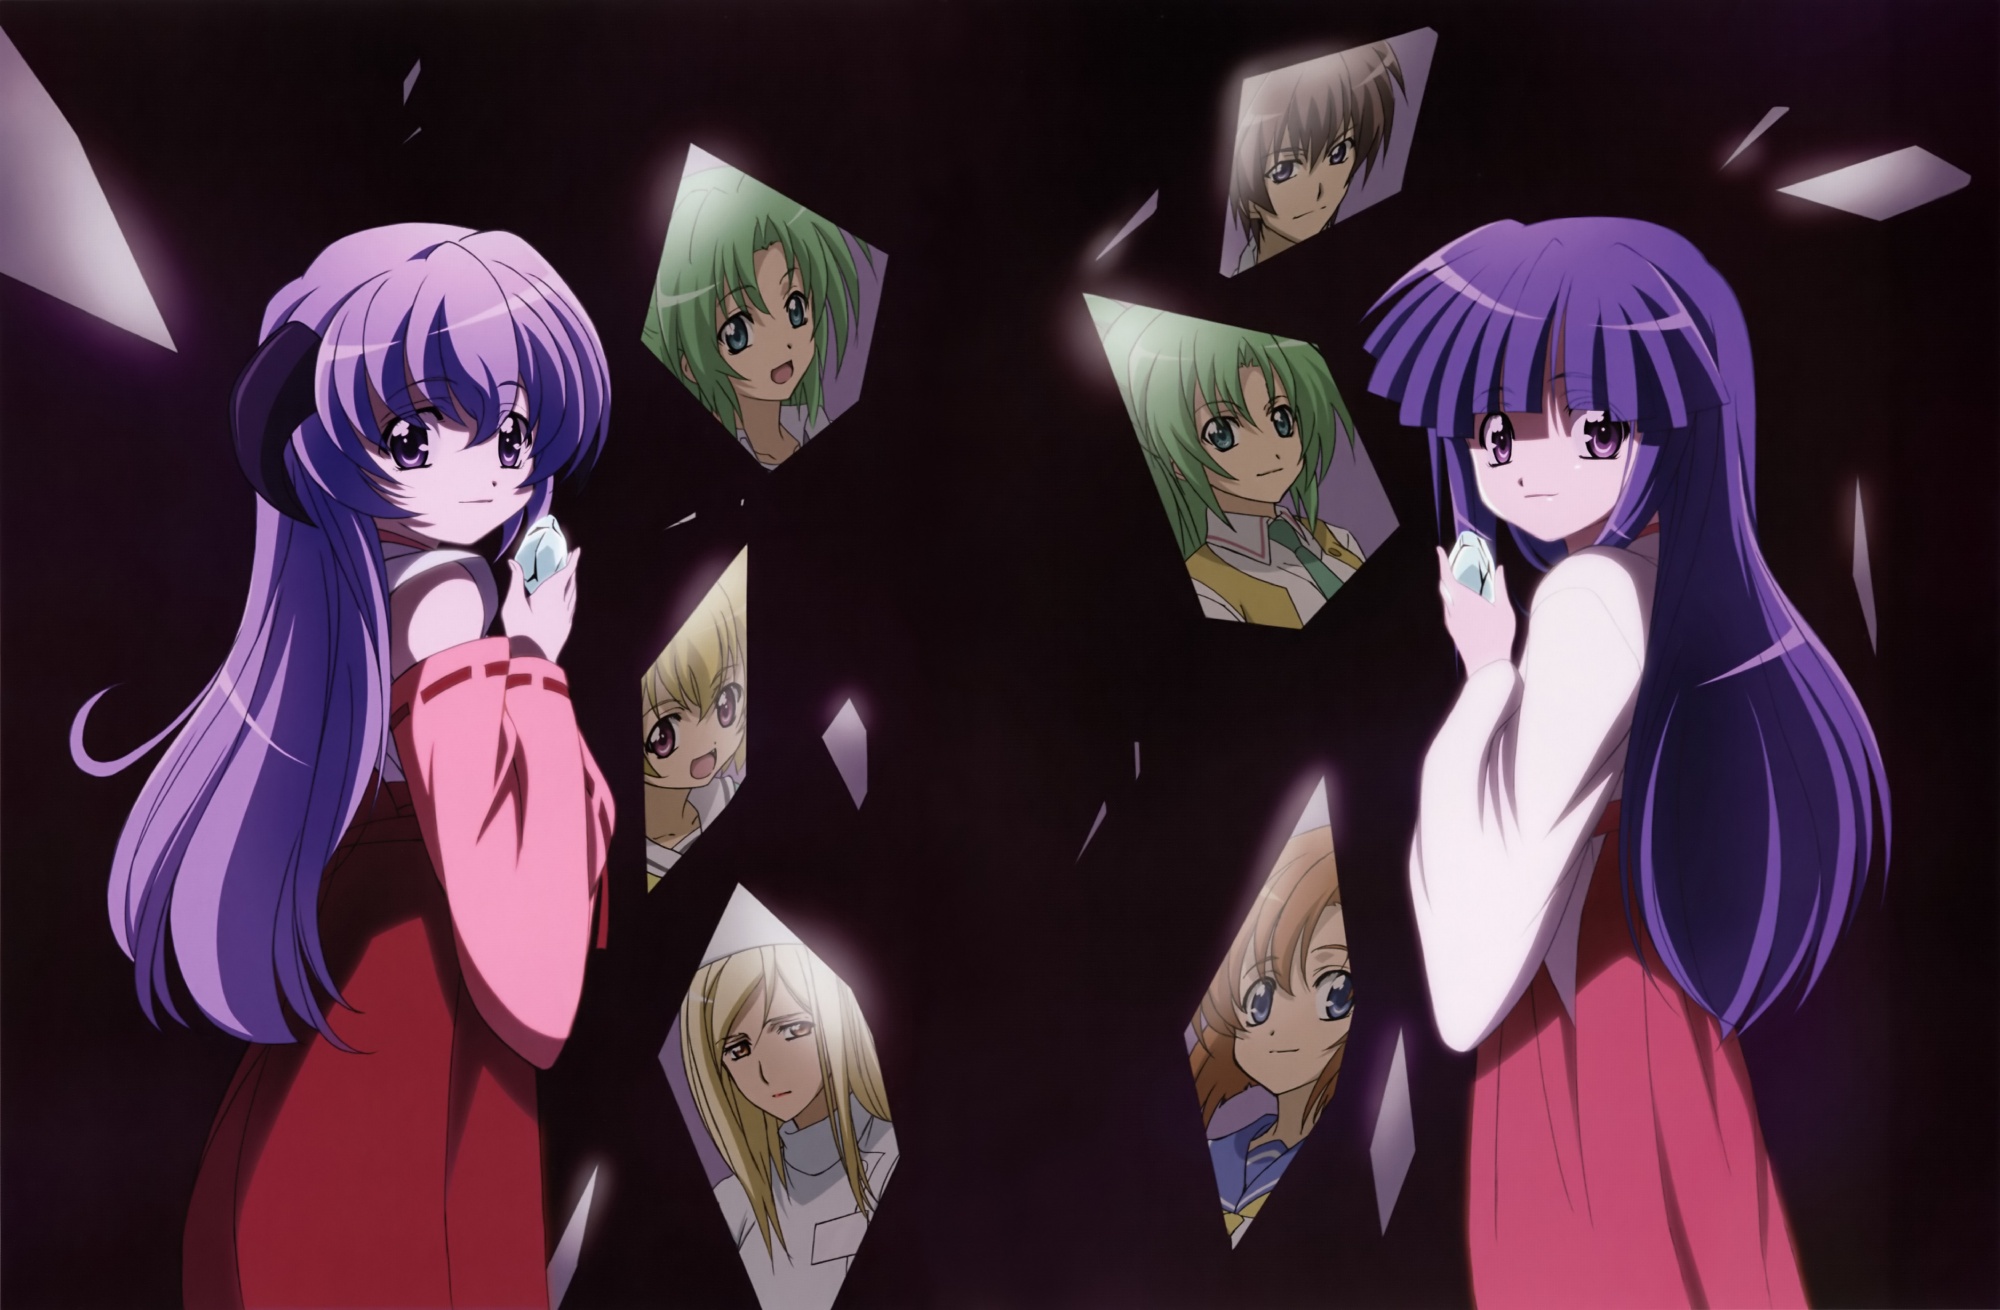 Group of characters from Higurashi When They Cry in a mirror, including Furude Rika and Maebara Keiichi